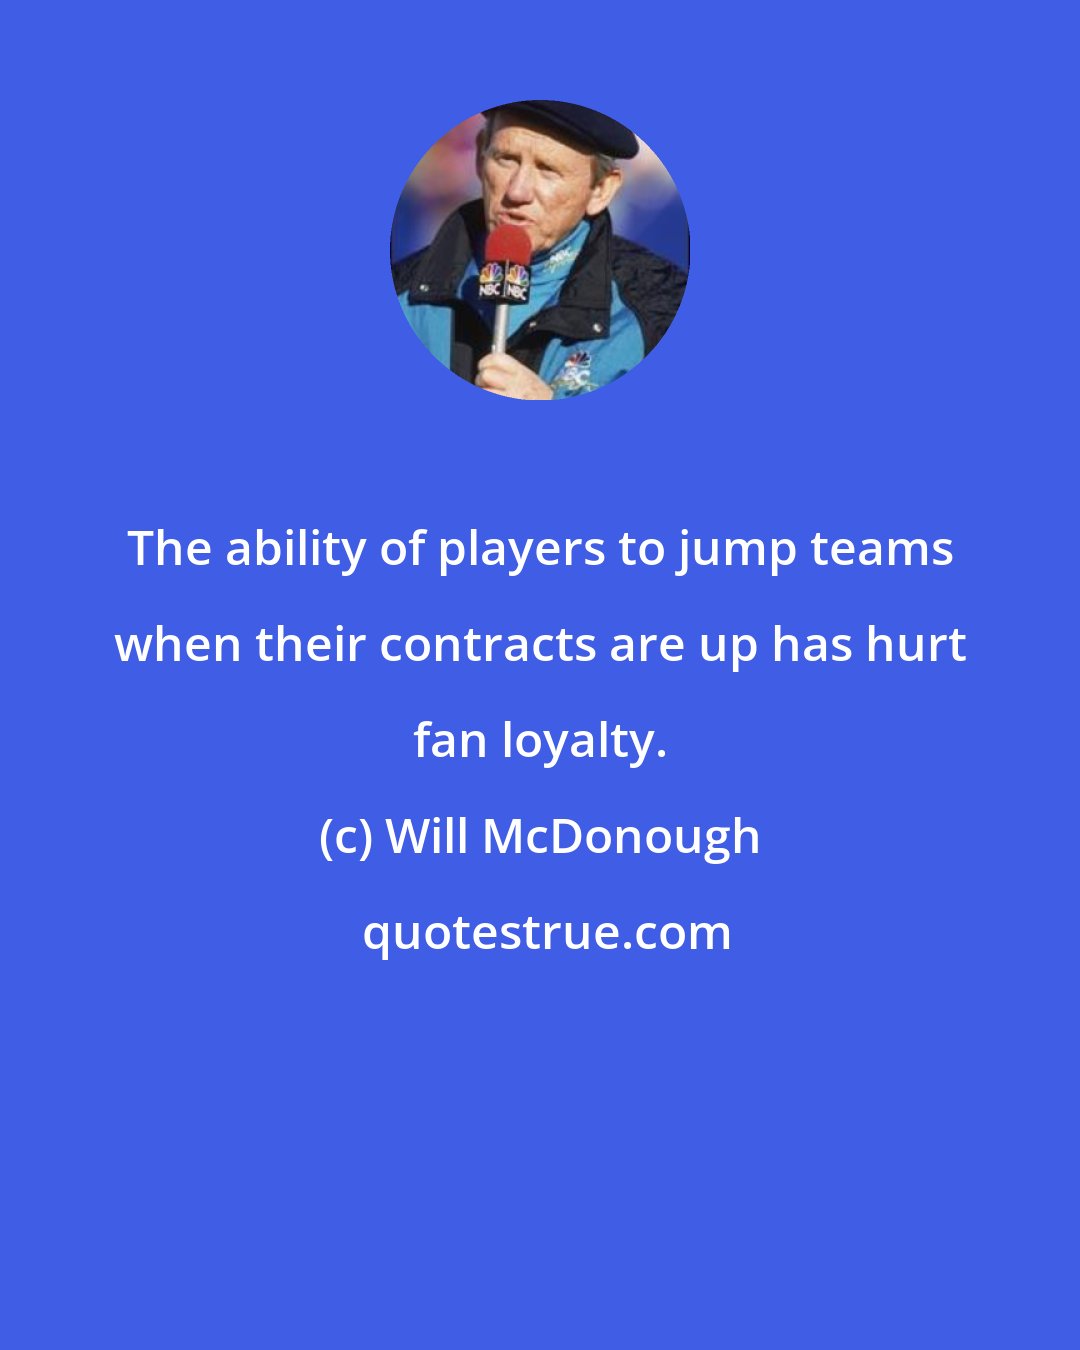 Will McDonough: The ability of players to jump teams when their contracts are up has hurt fan loyalty.